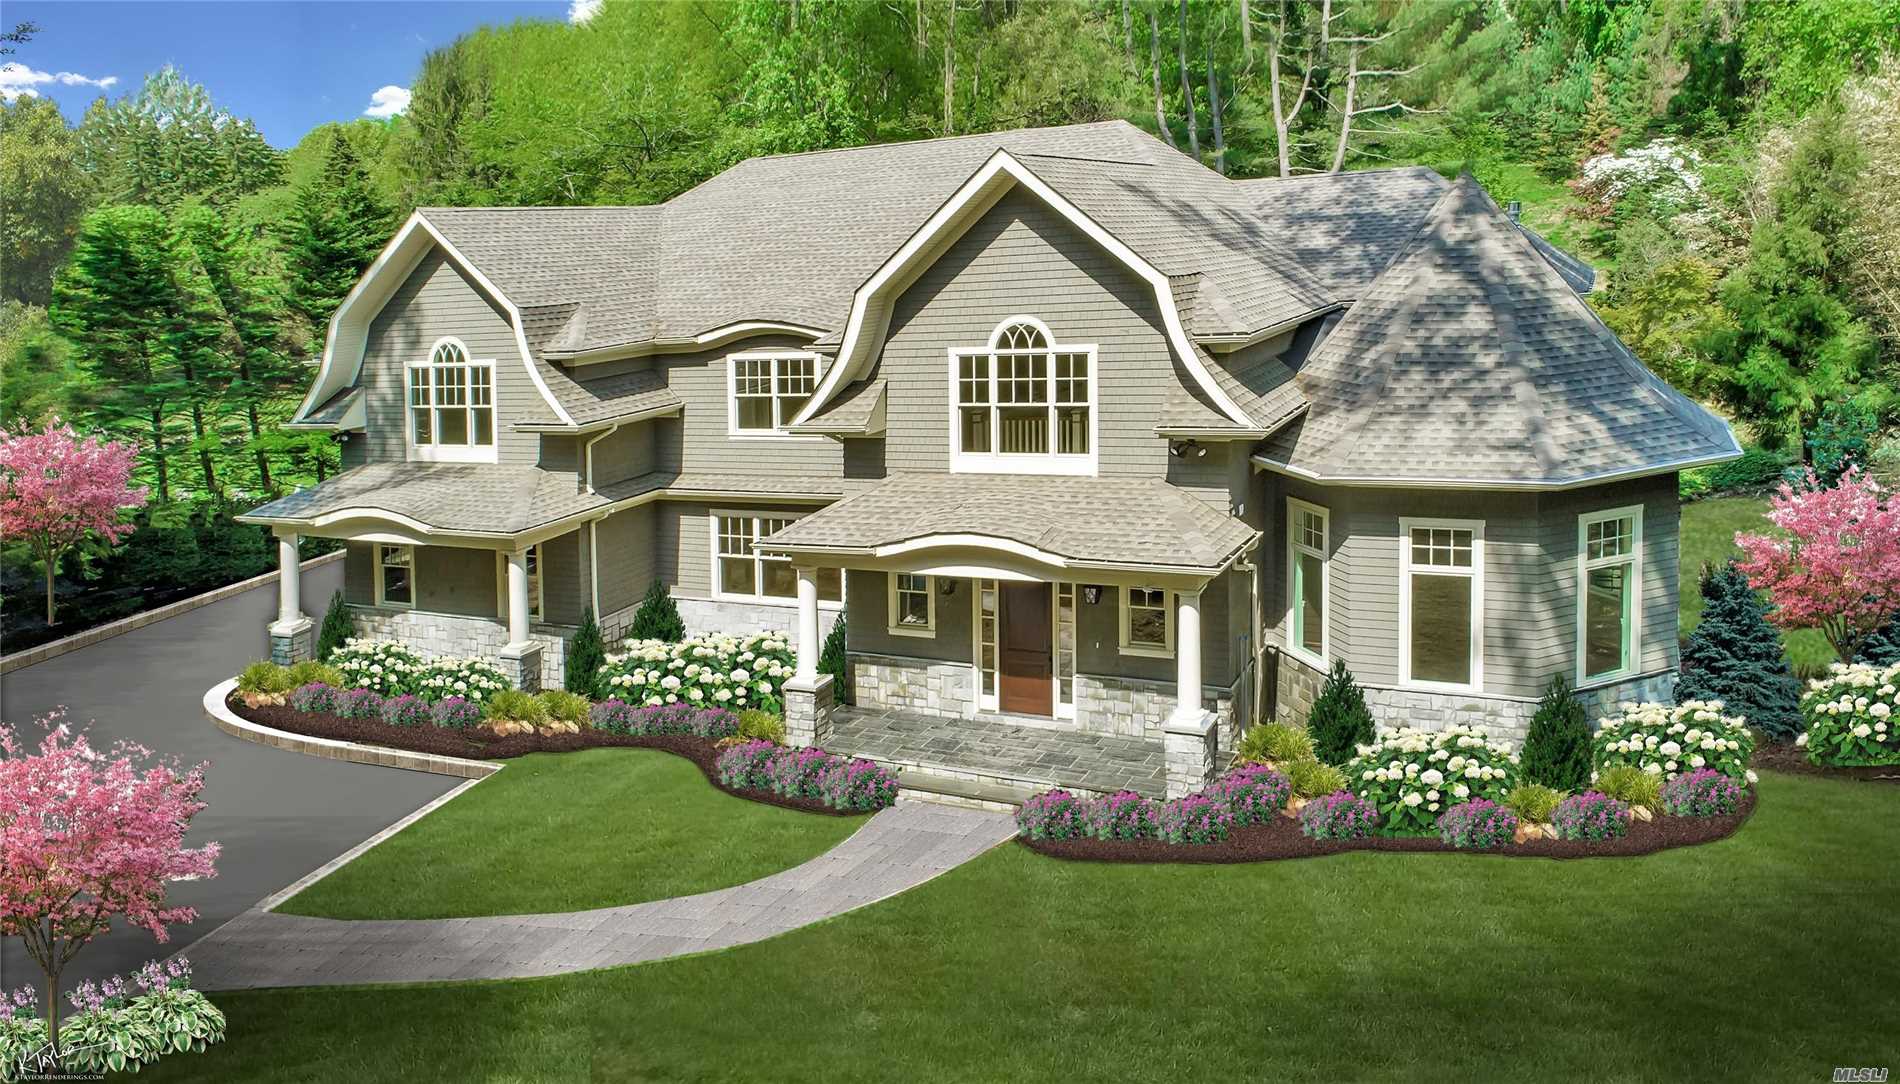 Roslyn Harbor. Spectacular New Construction In The Heart Of Roslyn Harbor. Featuring 6300 Square Feet Of Hampton Style Luxury On Over 1 Lush Acre. 6 Bedrooms, 4.5 Baths With Radiant Heat, Huge Rooms For Entertaining & Soaring Ceilings. Perfection!